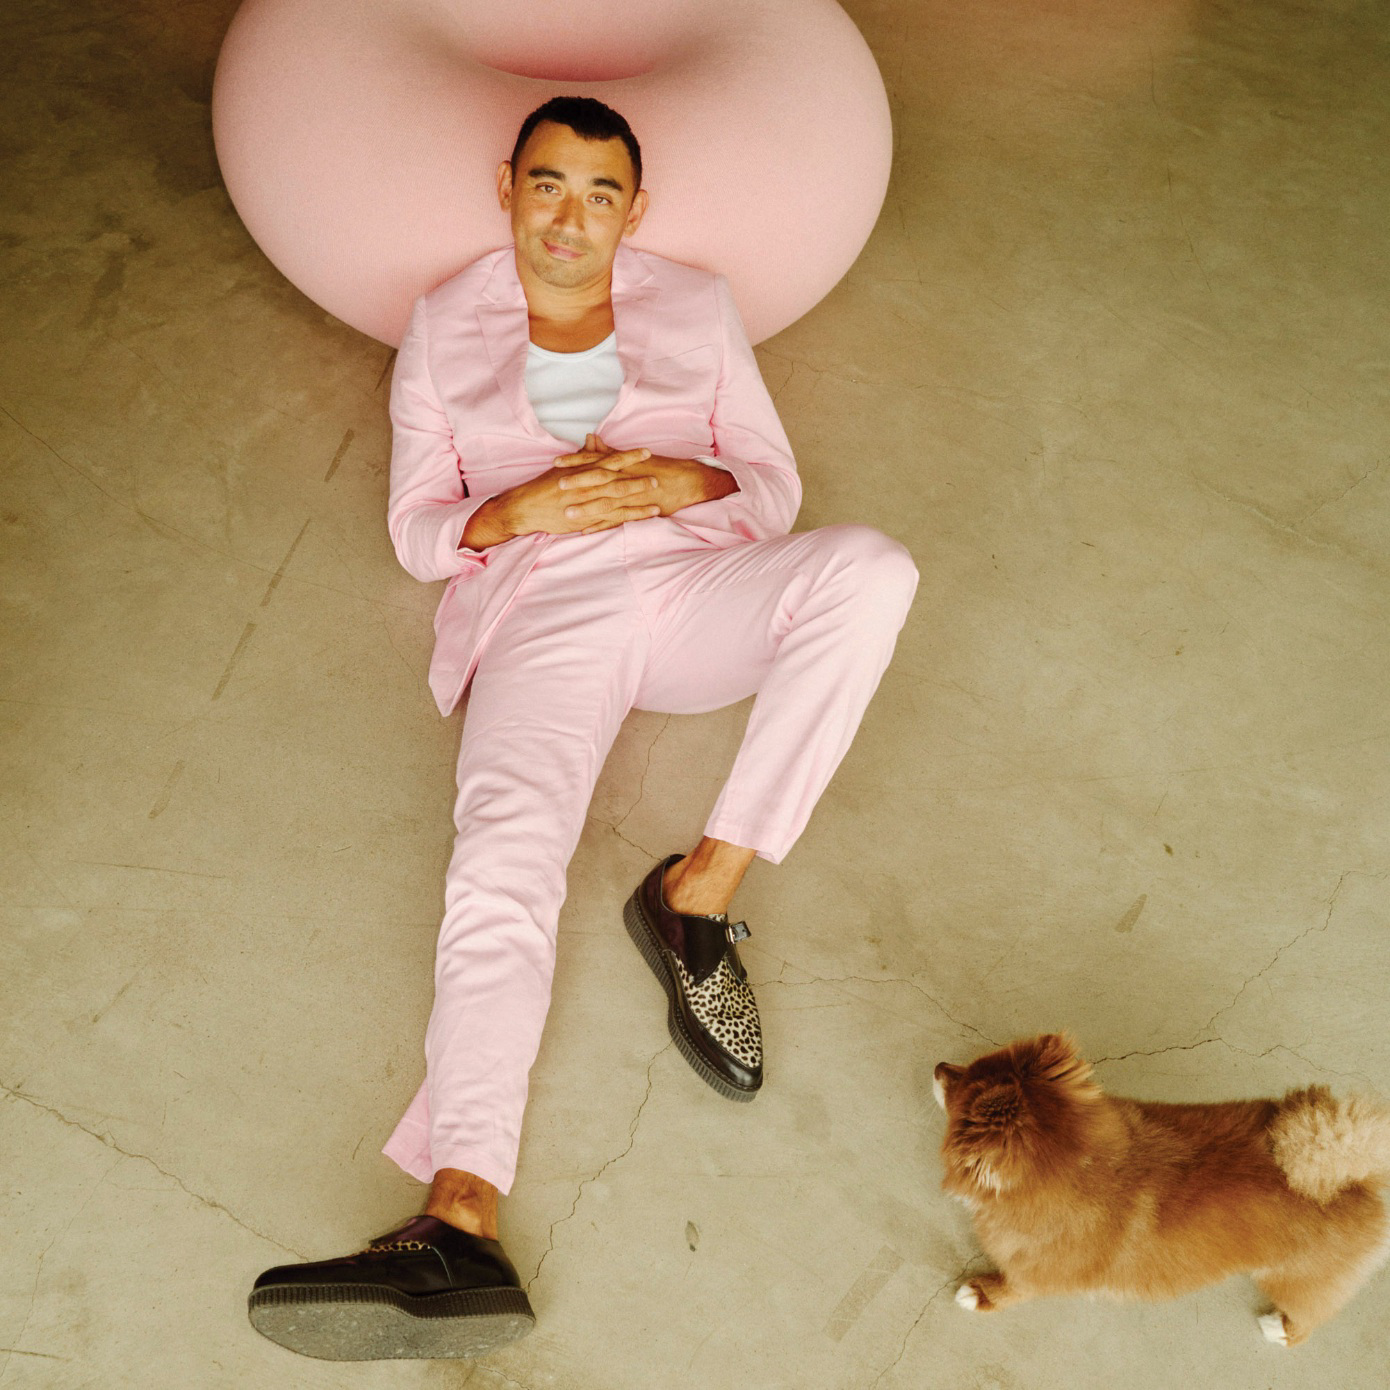 A man lounging on the ground next to a small dog.